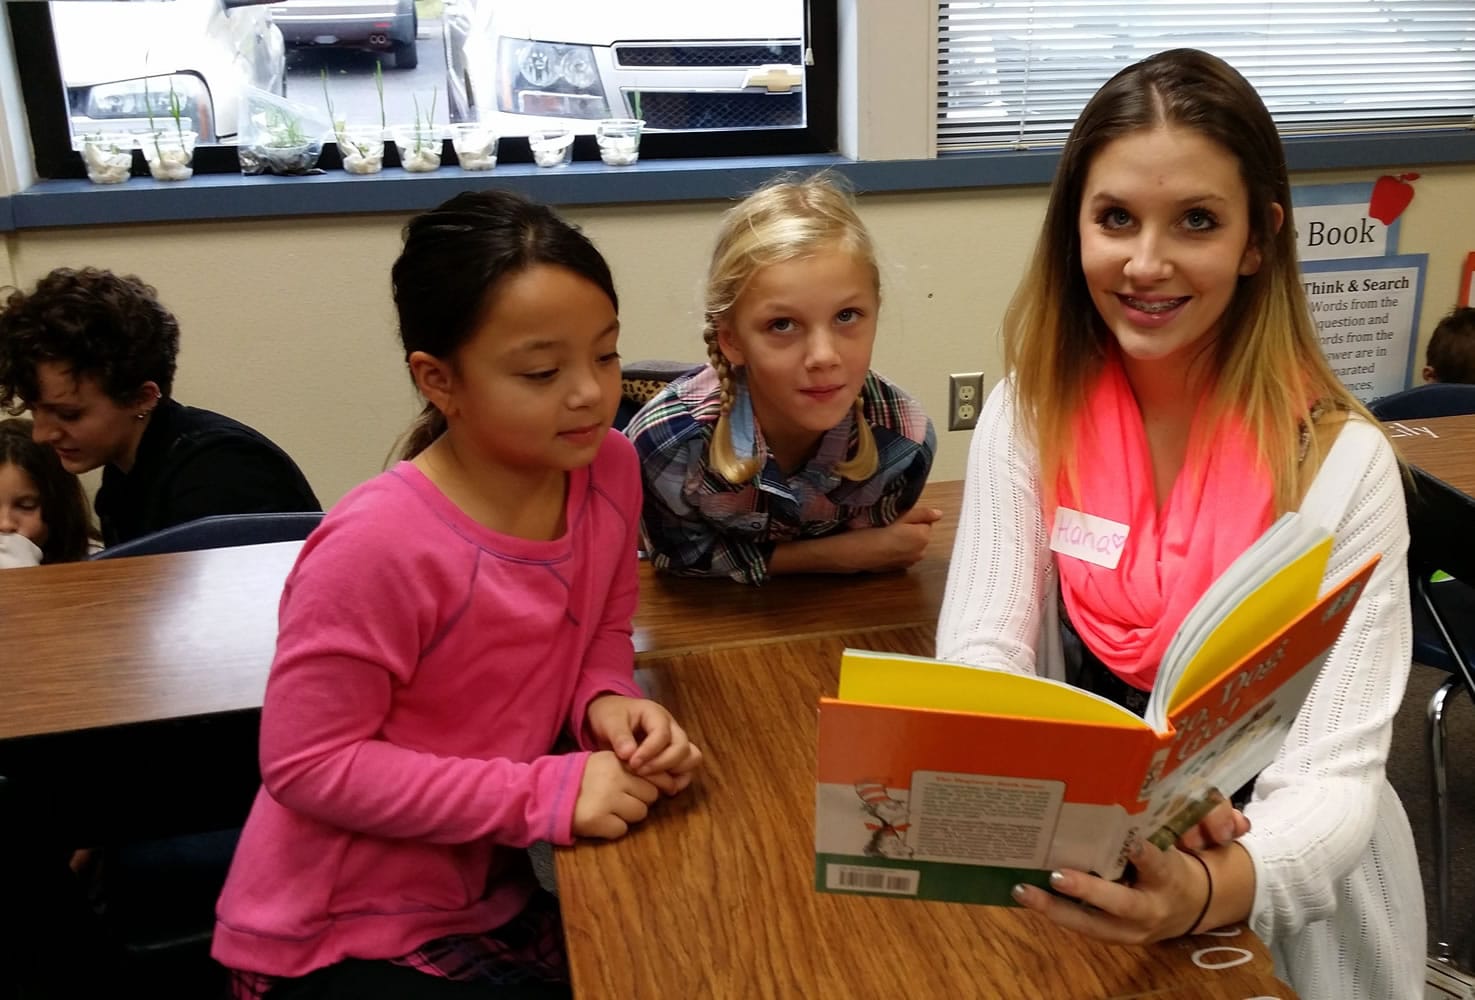 Gause Elementary School students Jayda Peterson and Avery Price read with Hana Nekvapil, a student in the WHS child development class.